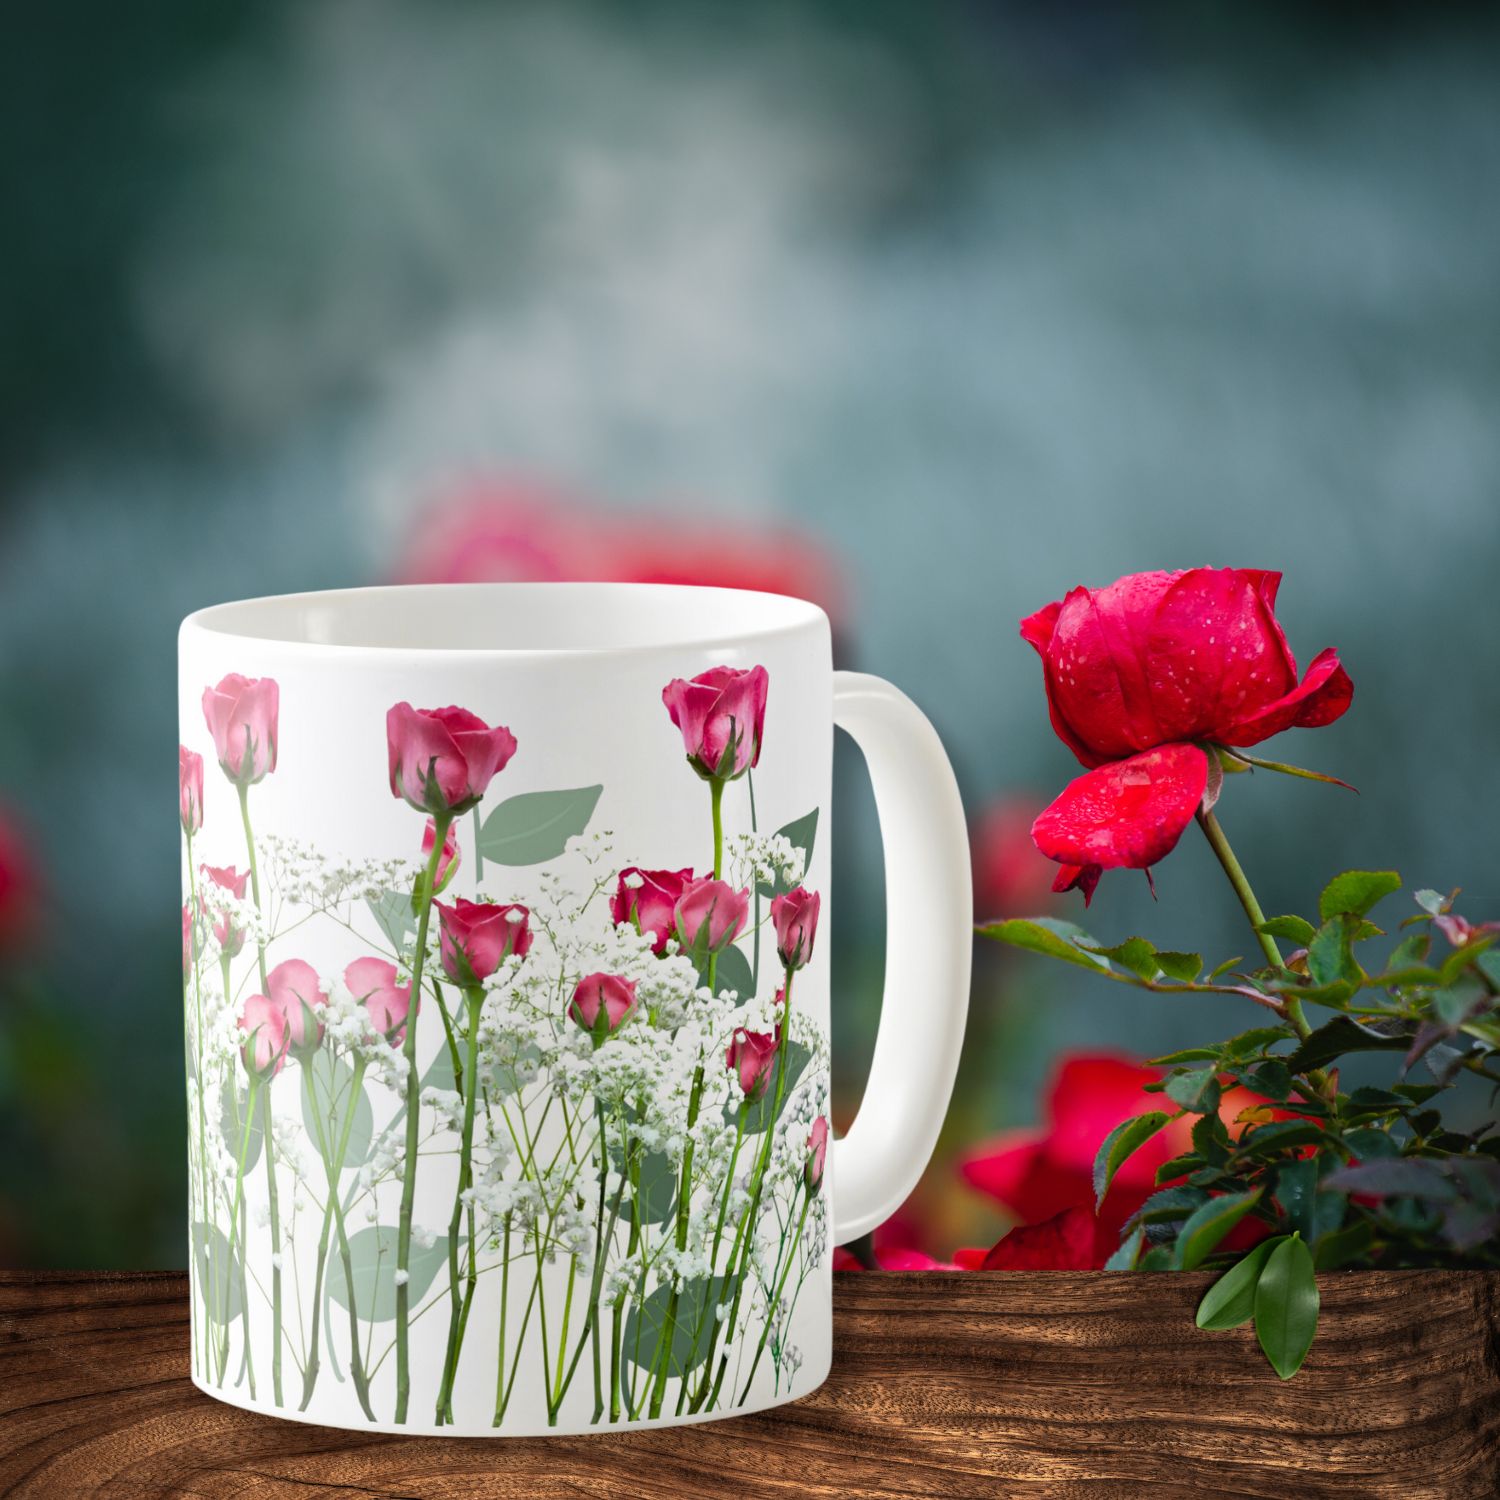 Coffee mug decorated with pink roses with green stems on a white background. Design part of a personalizable coffee mug.